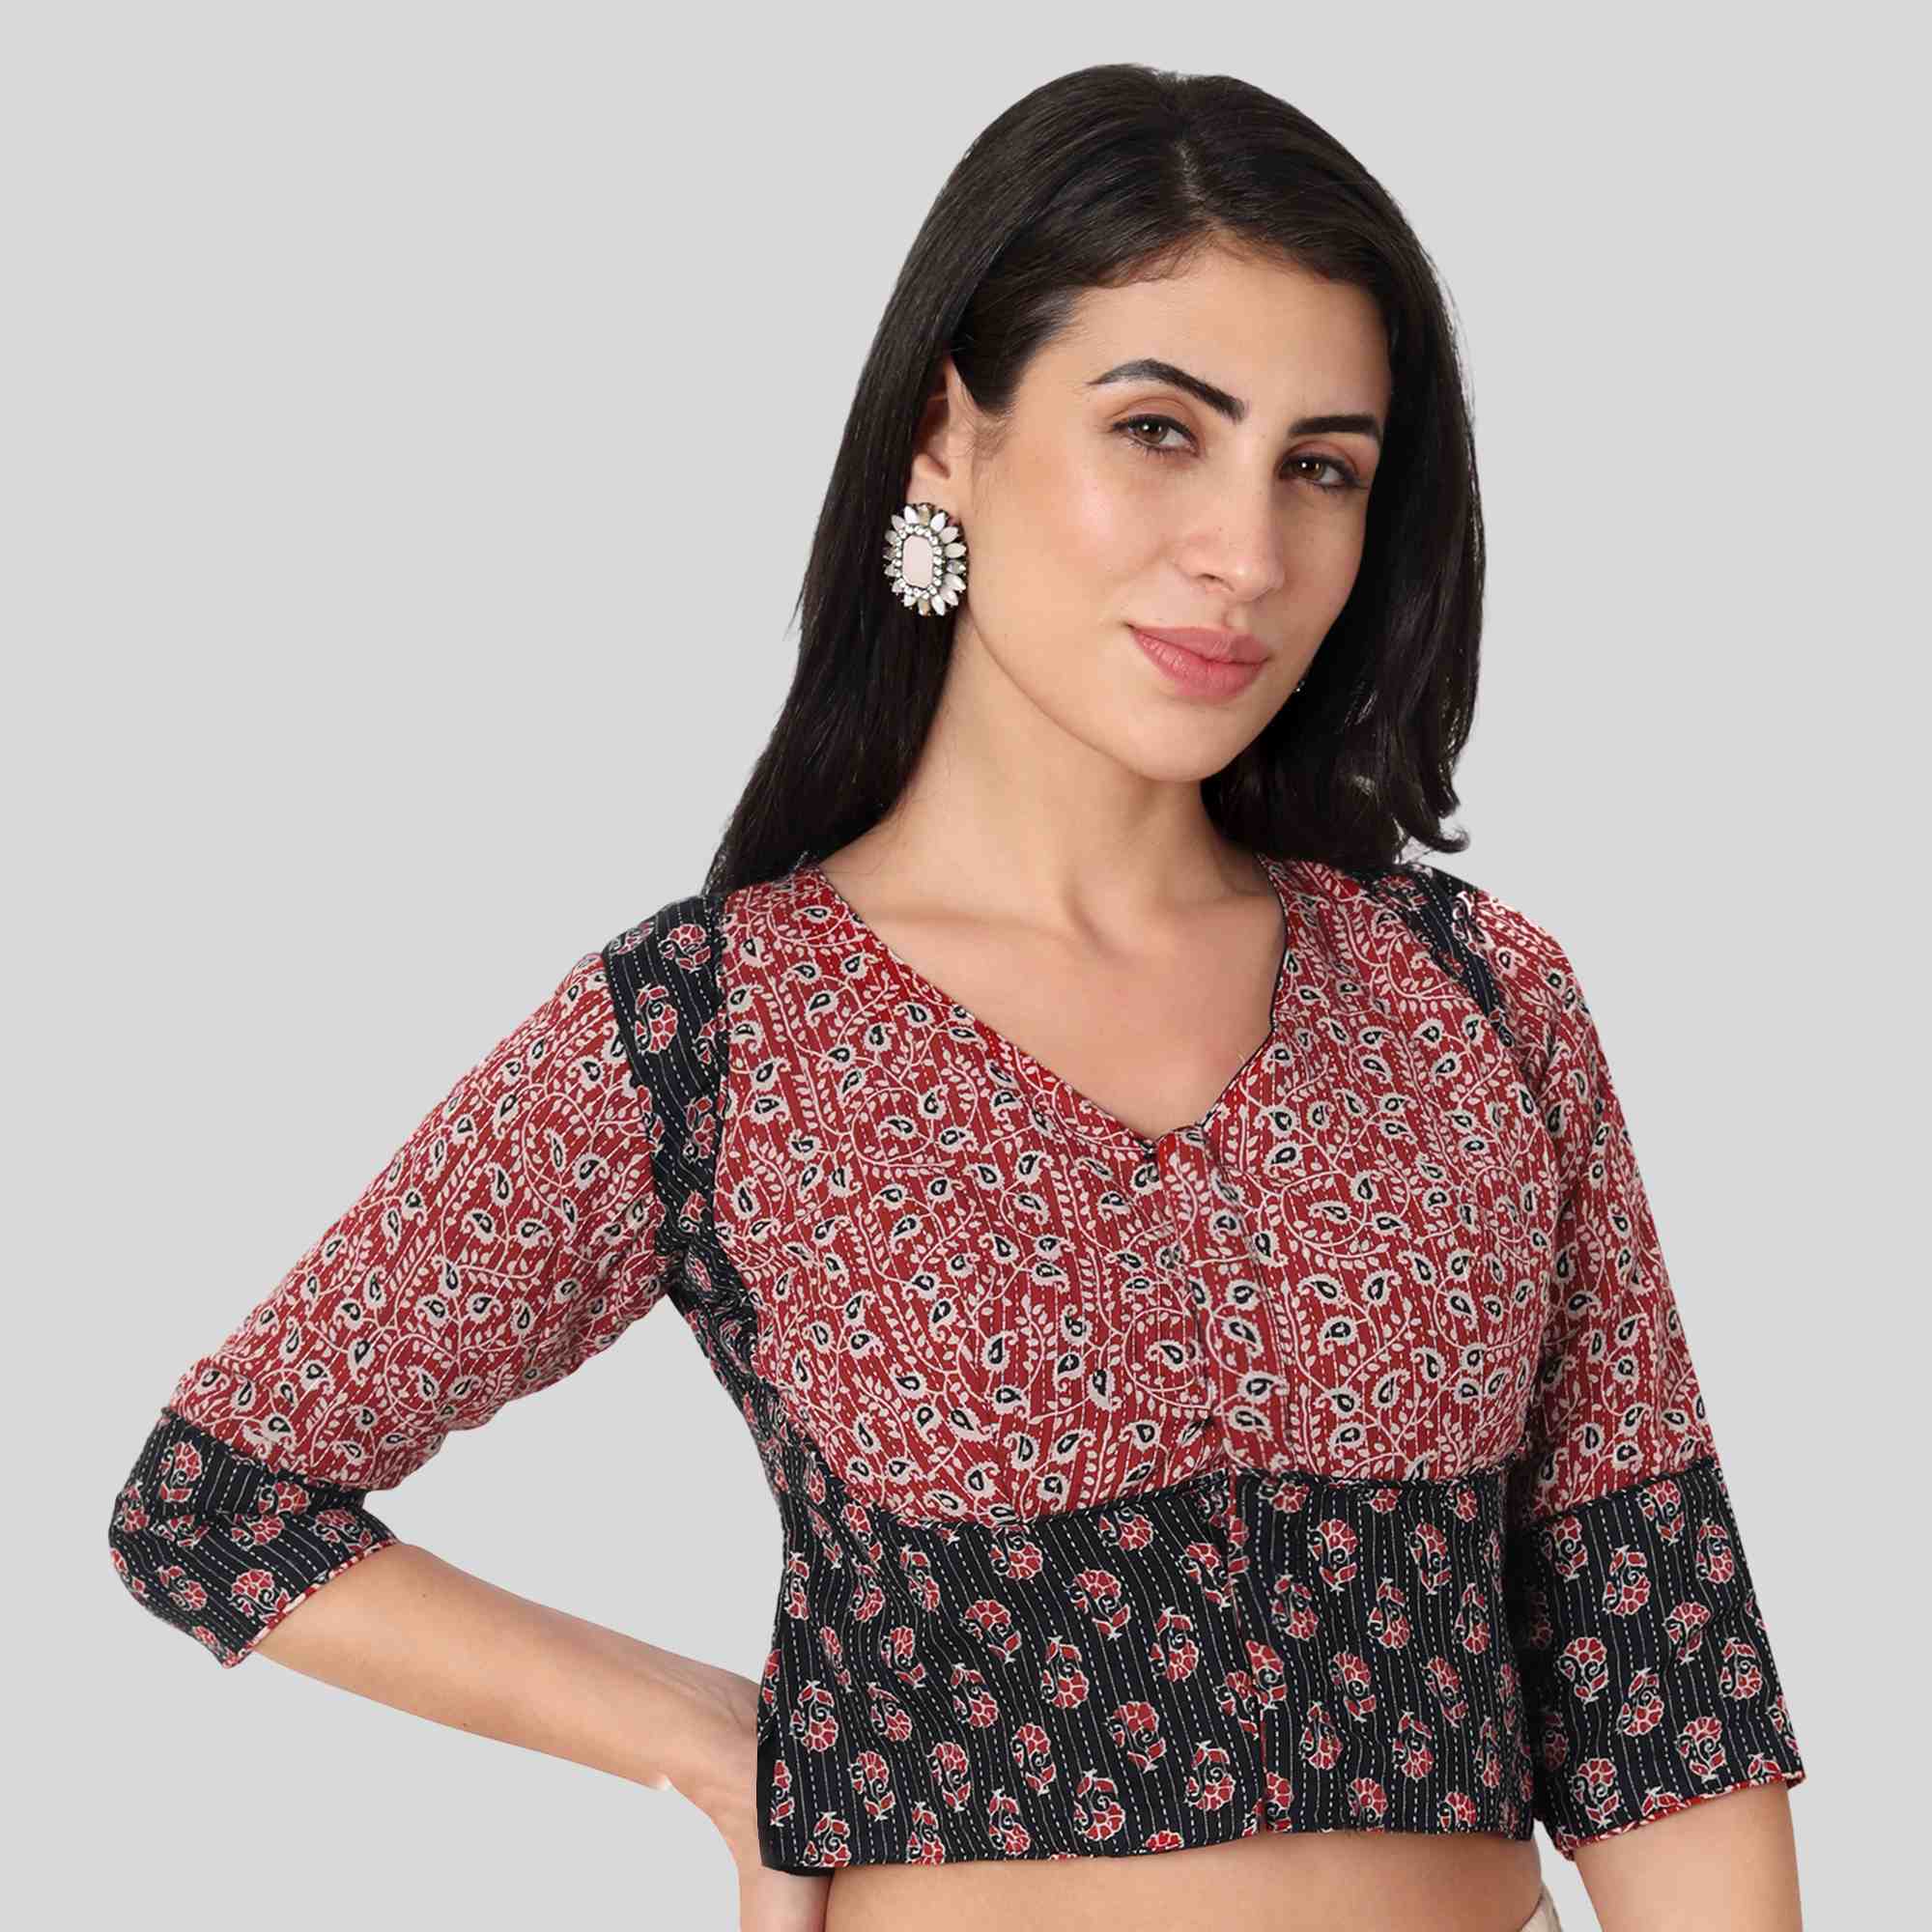 Printed marron and navy blouse in crop top model long blouse